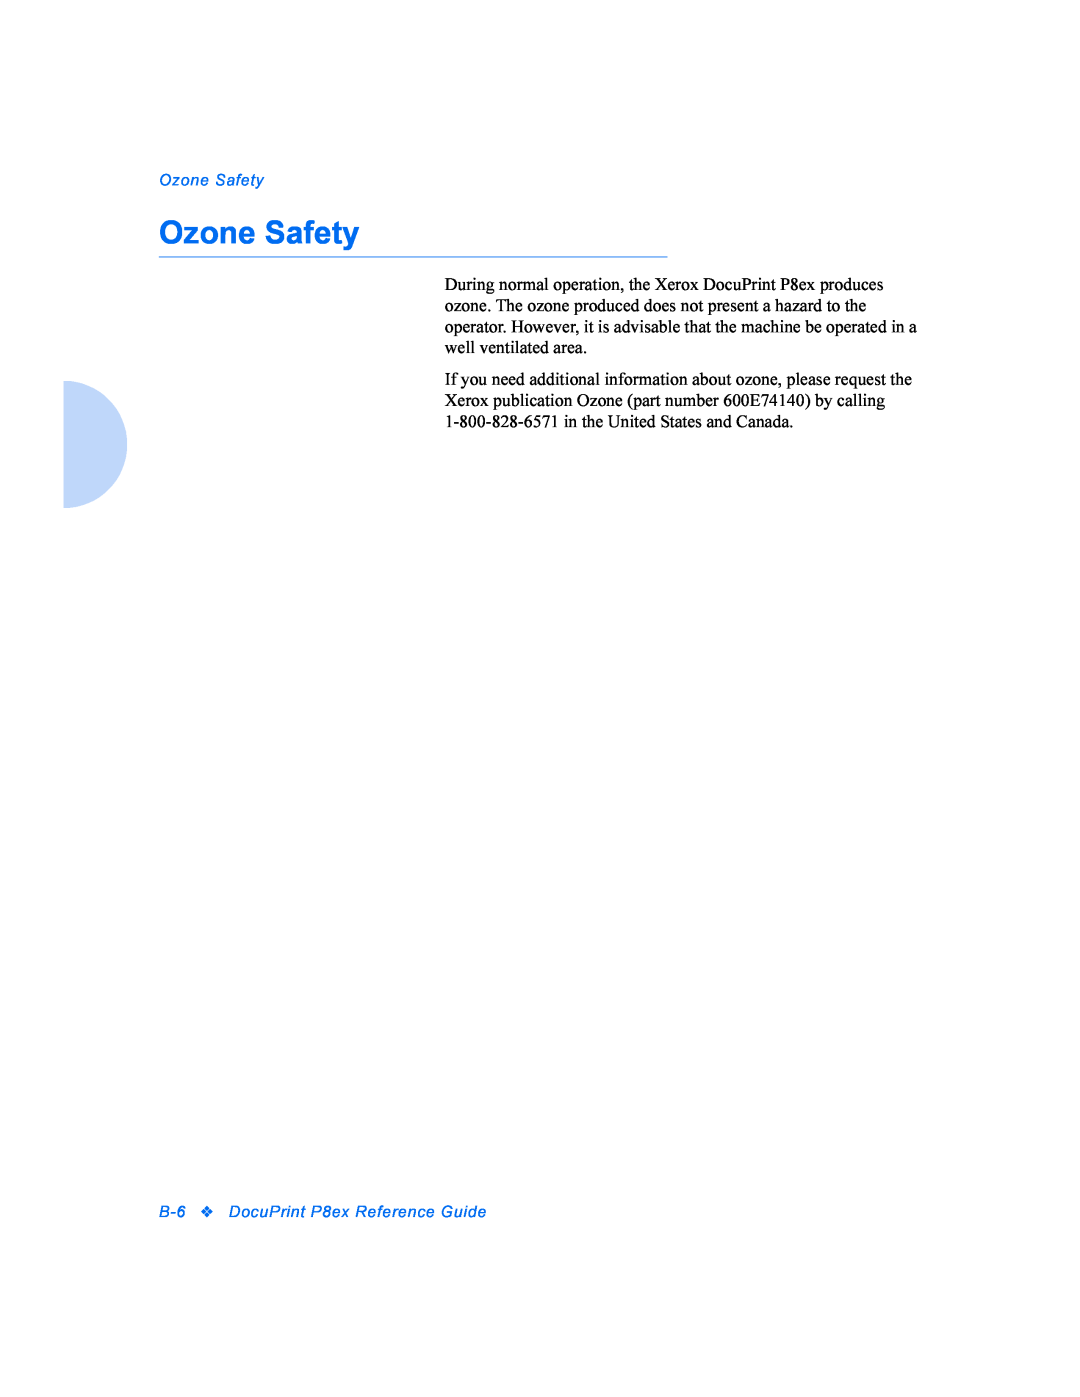 Xerox manual Ozone Safety, B-6DocuPrint P8ex Reference Guide 